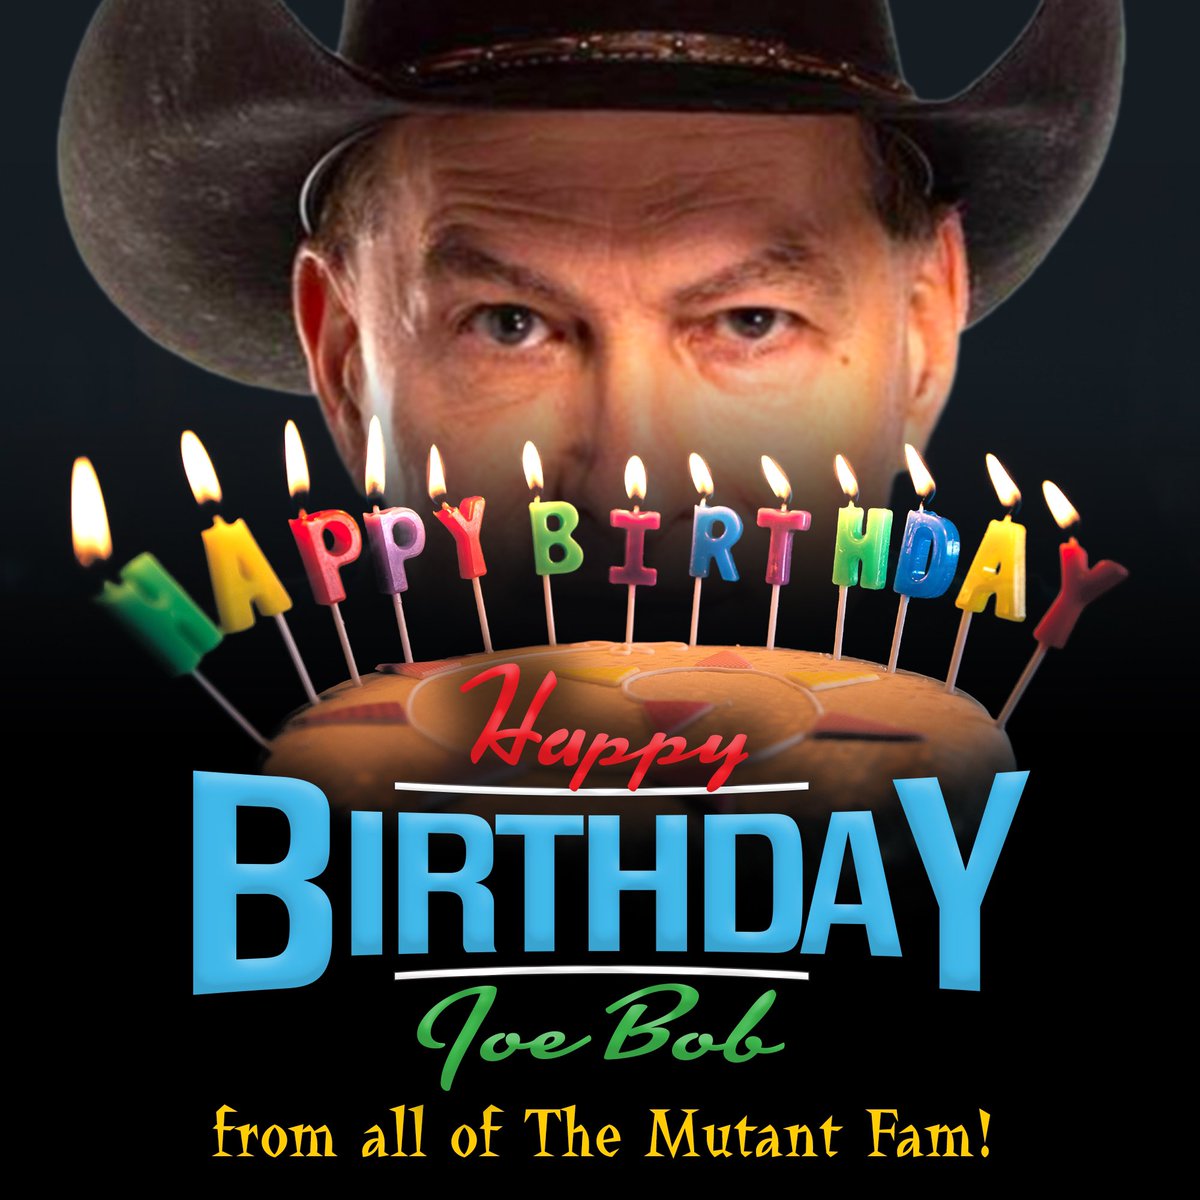 HAPPY 70TH BIRTHDAY to the man, the myth, the legend - Mr. Joe Bob Briggs! Whether we've been watching & reading your work our entire lives, or we recently discovered The Last Drive-In, all of us Mutants are here because of your passion for movies. #HappyBirthdayJoeBob 1/3